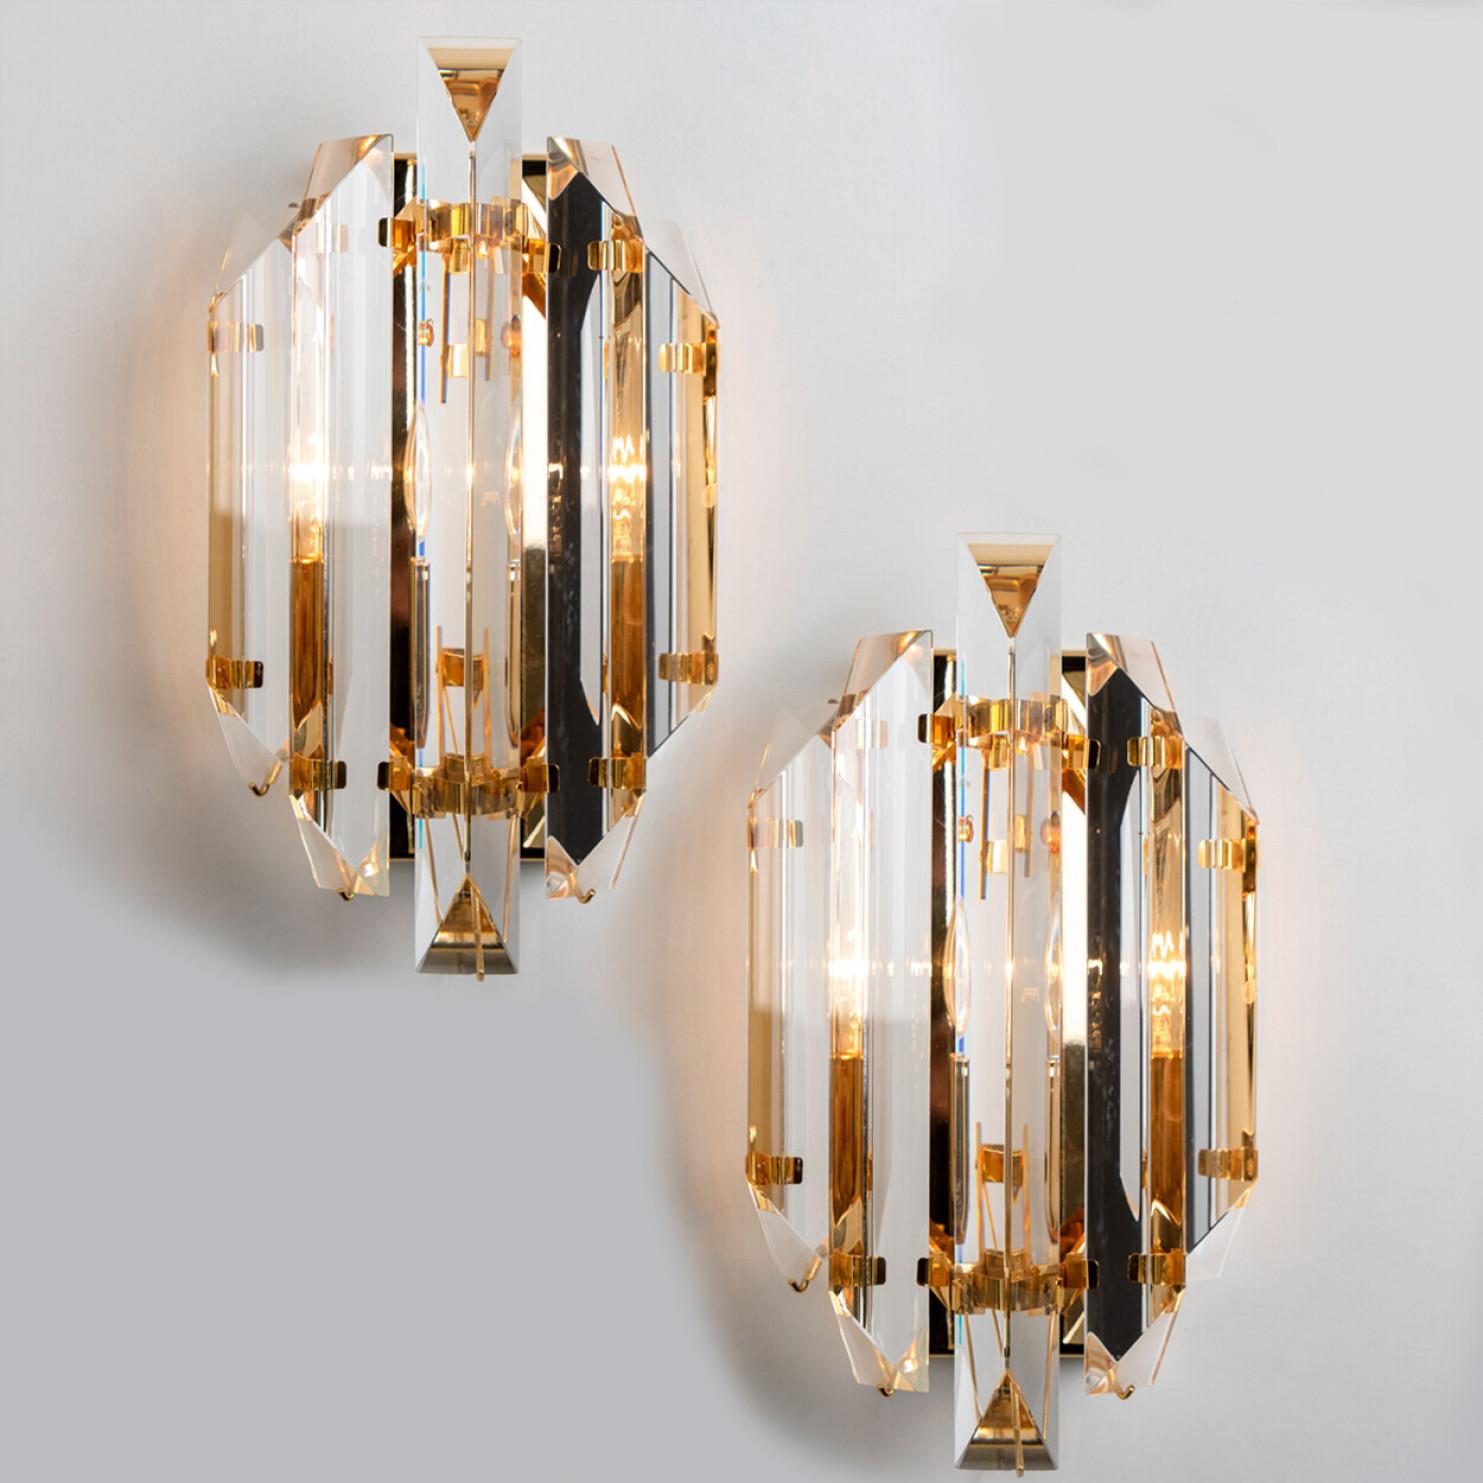 Beautiful tube shaped glass wall sconces featuring five long crystal clear glass tube-like rods, with brass details and back plate. Illuminates beautifully. High-end pieces.

Cleaned and well-wired, in full working order and ready to use. The brass